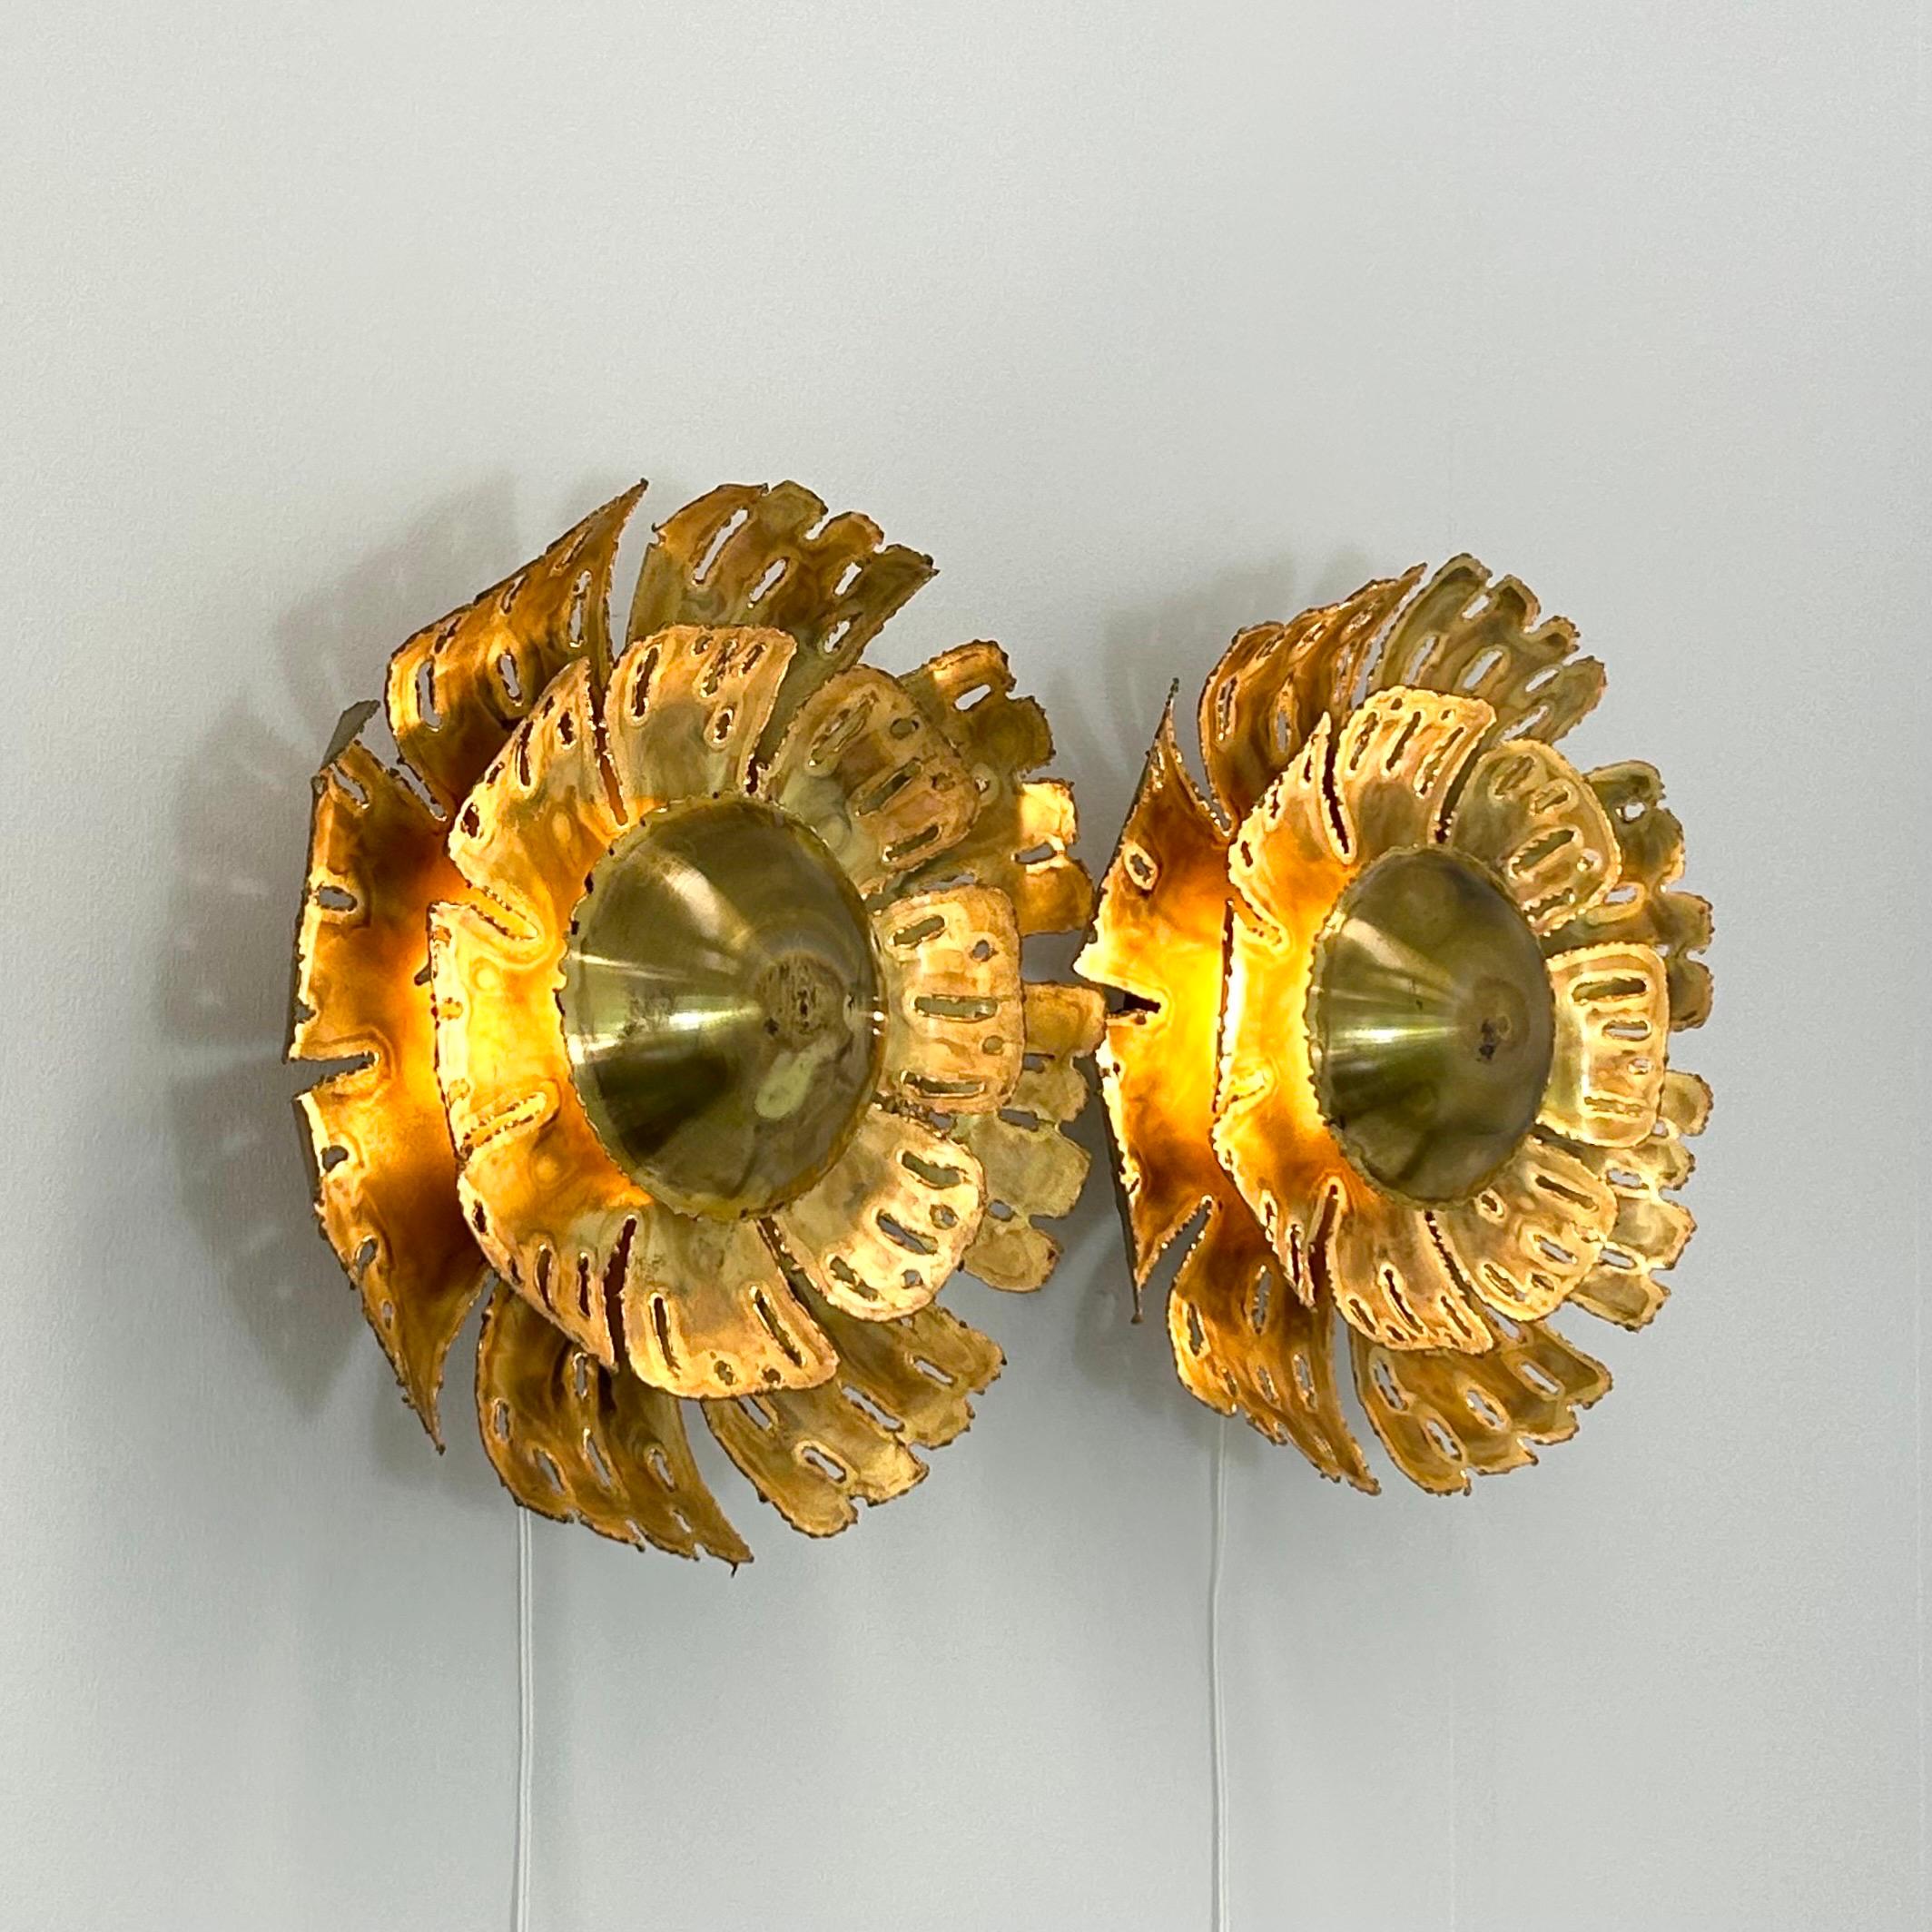 Brutalist Pair of Large Brass Wall Lamps by Svend Aage Holm Sorensen, 1960s, Denmark